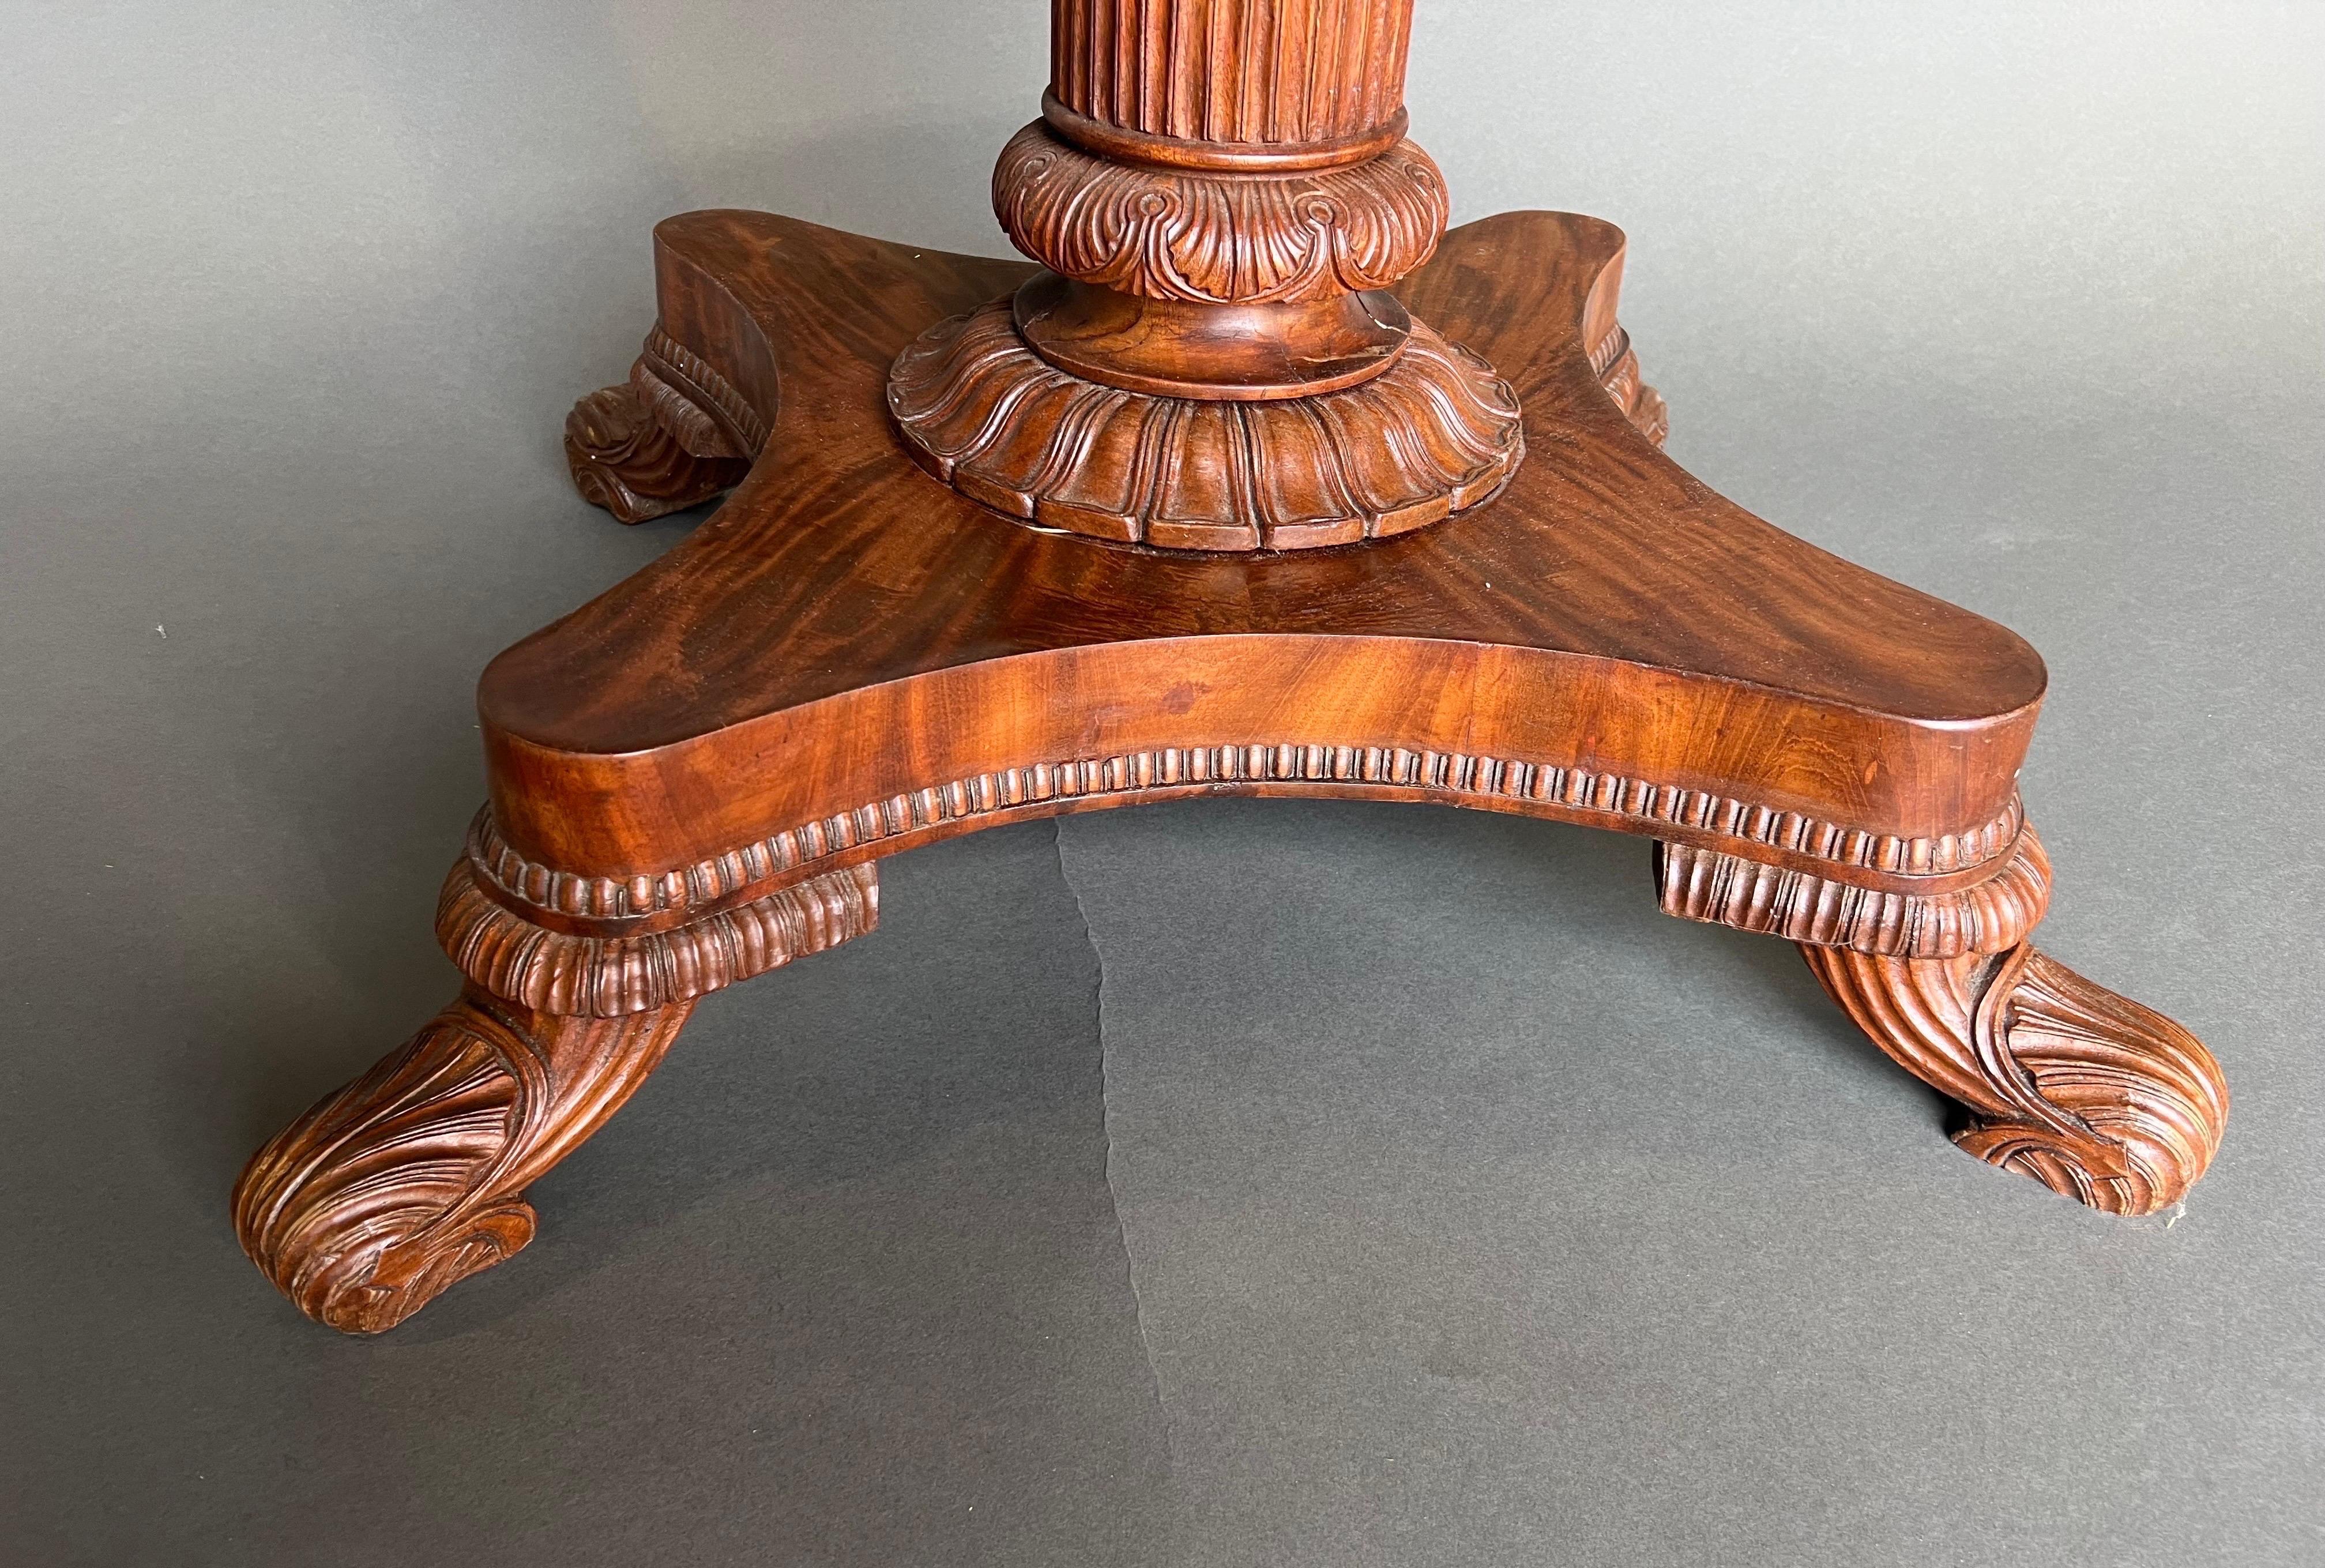 Fine 19th century Irish Regency period oval breakfast table. Good color and great quality timbers used in this period Irish table. Oval top over turned pedestal base supported on four finely carved feet.